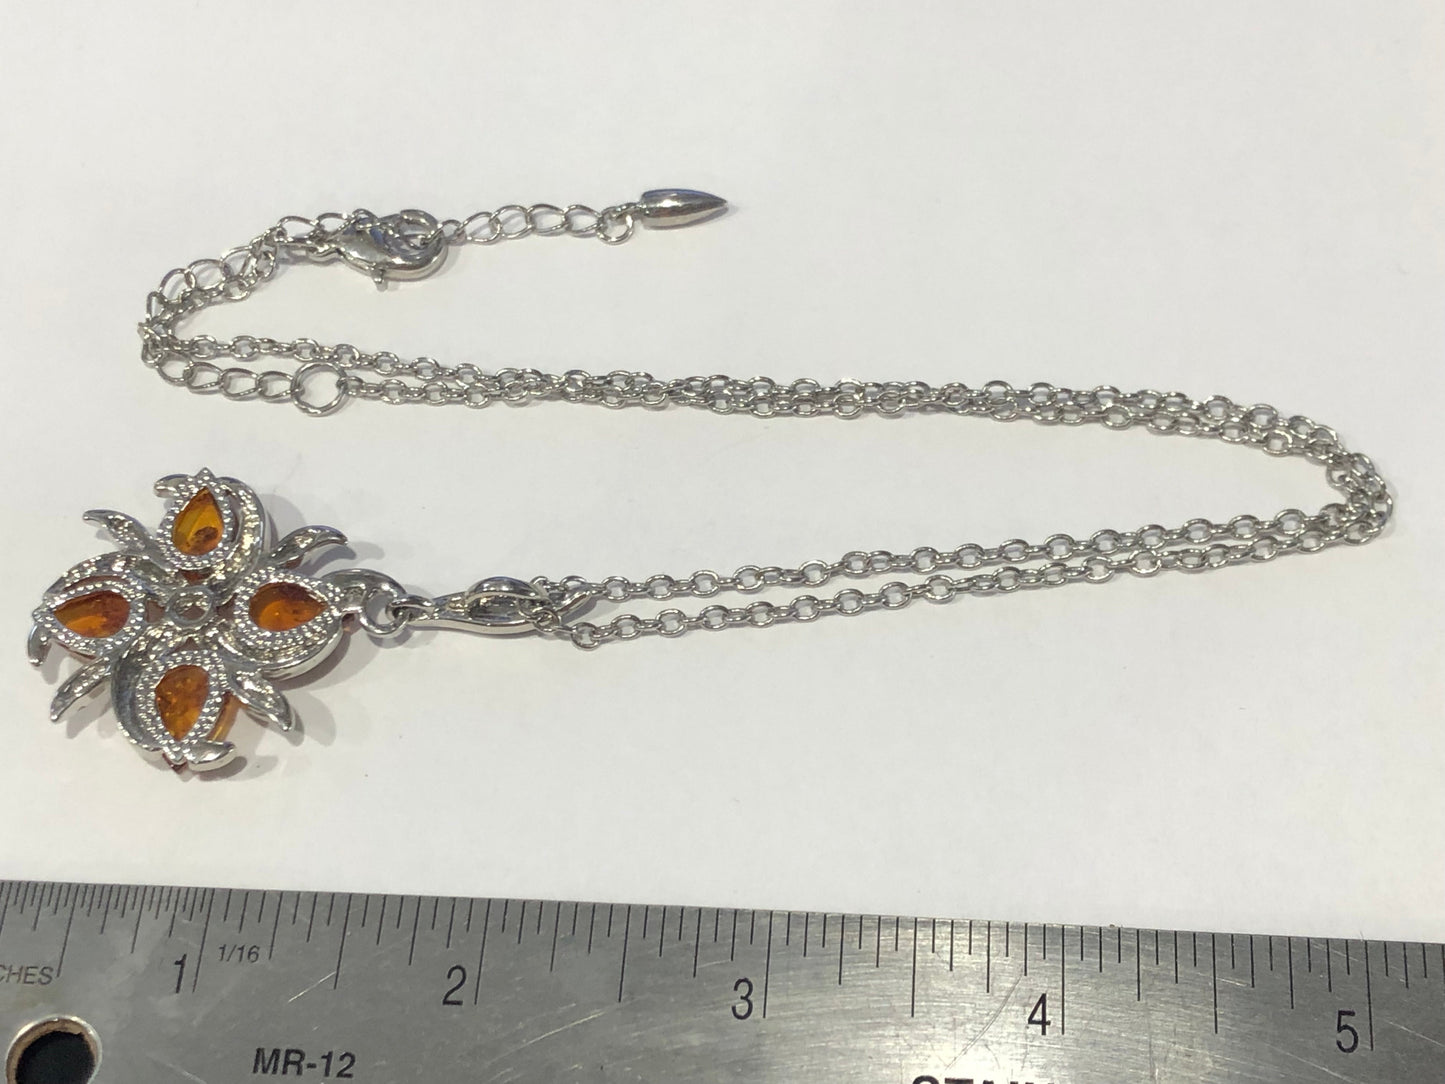 Amber flower pendant necklace silver tone